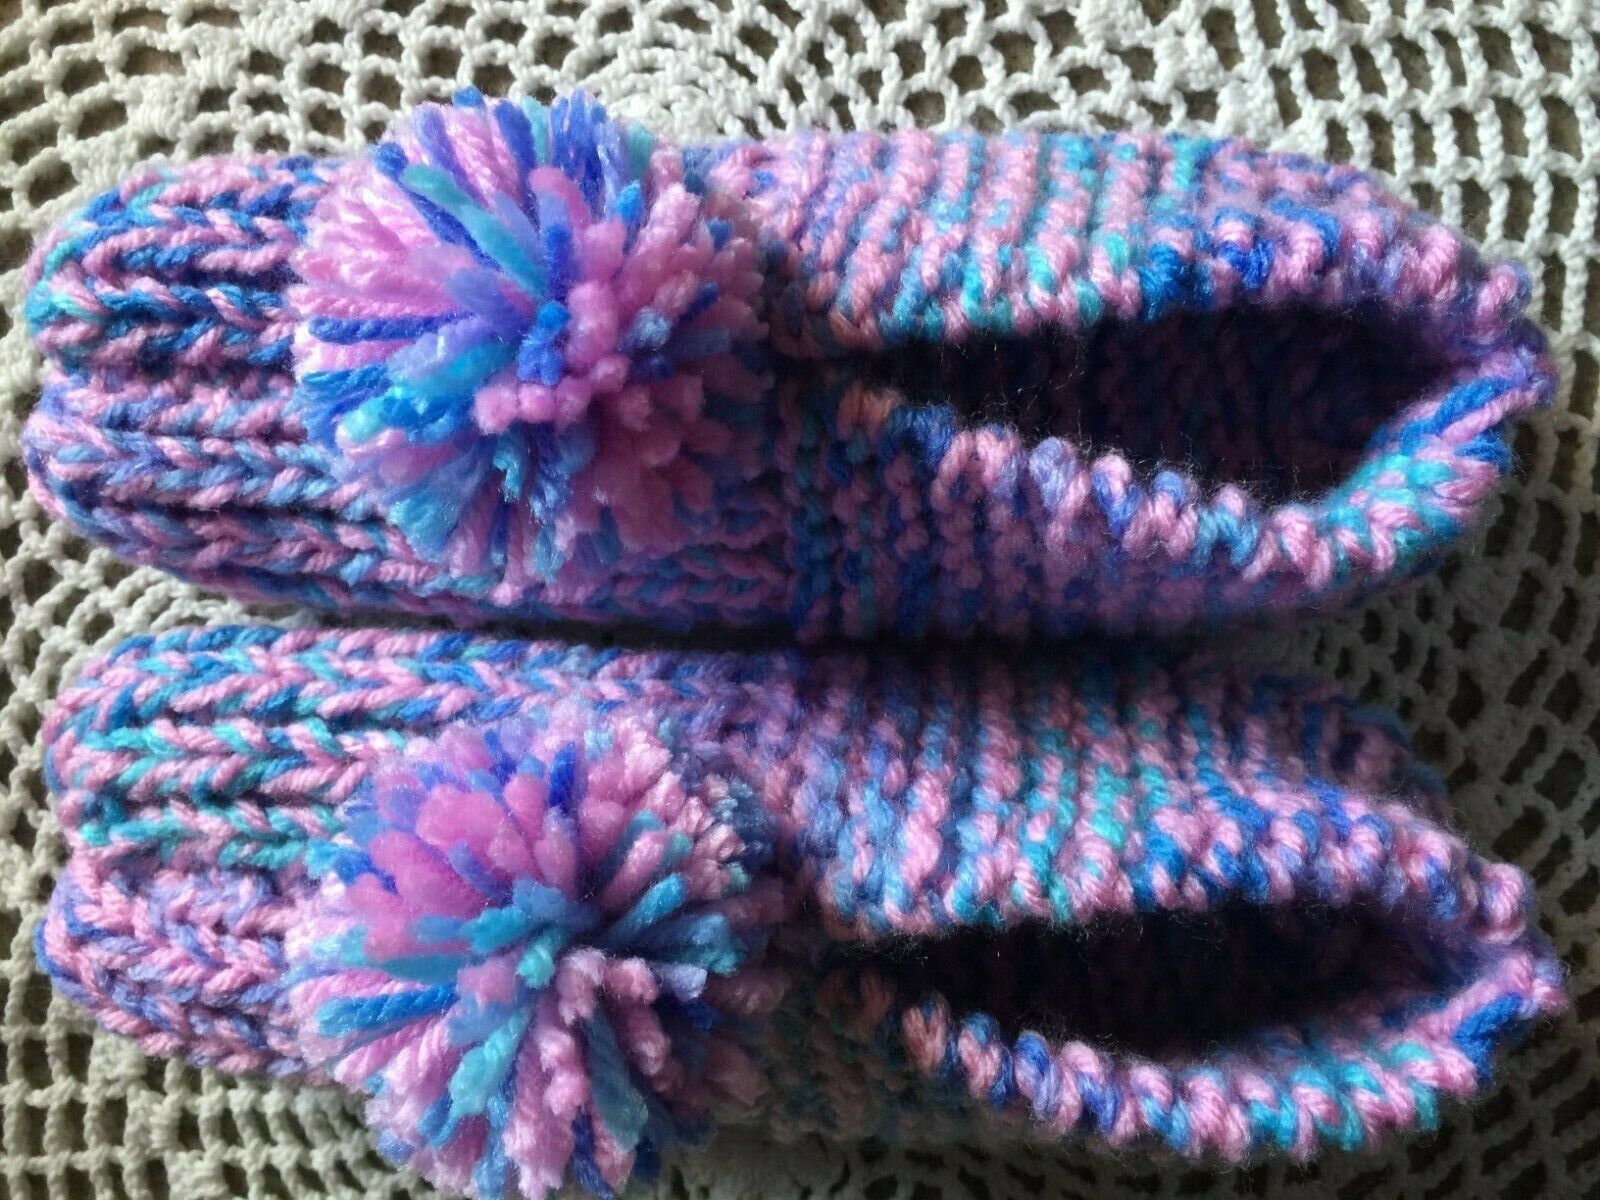 Nwot Amish Hand Knit Slippers Pink & Ocean Color Mix Wms Small Mans Xx Small 8"